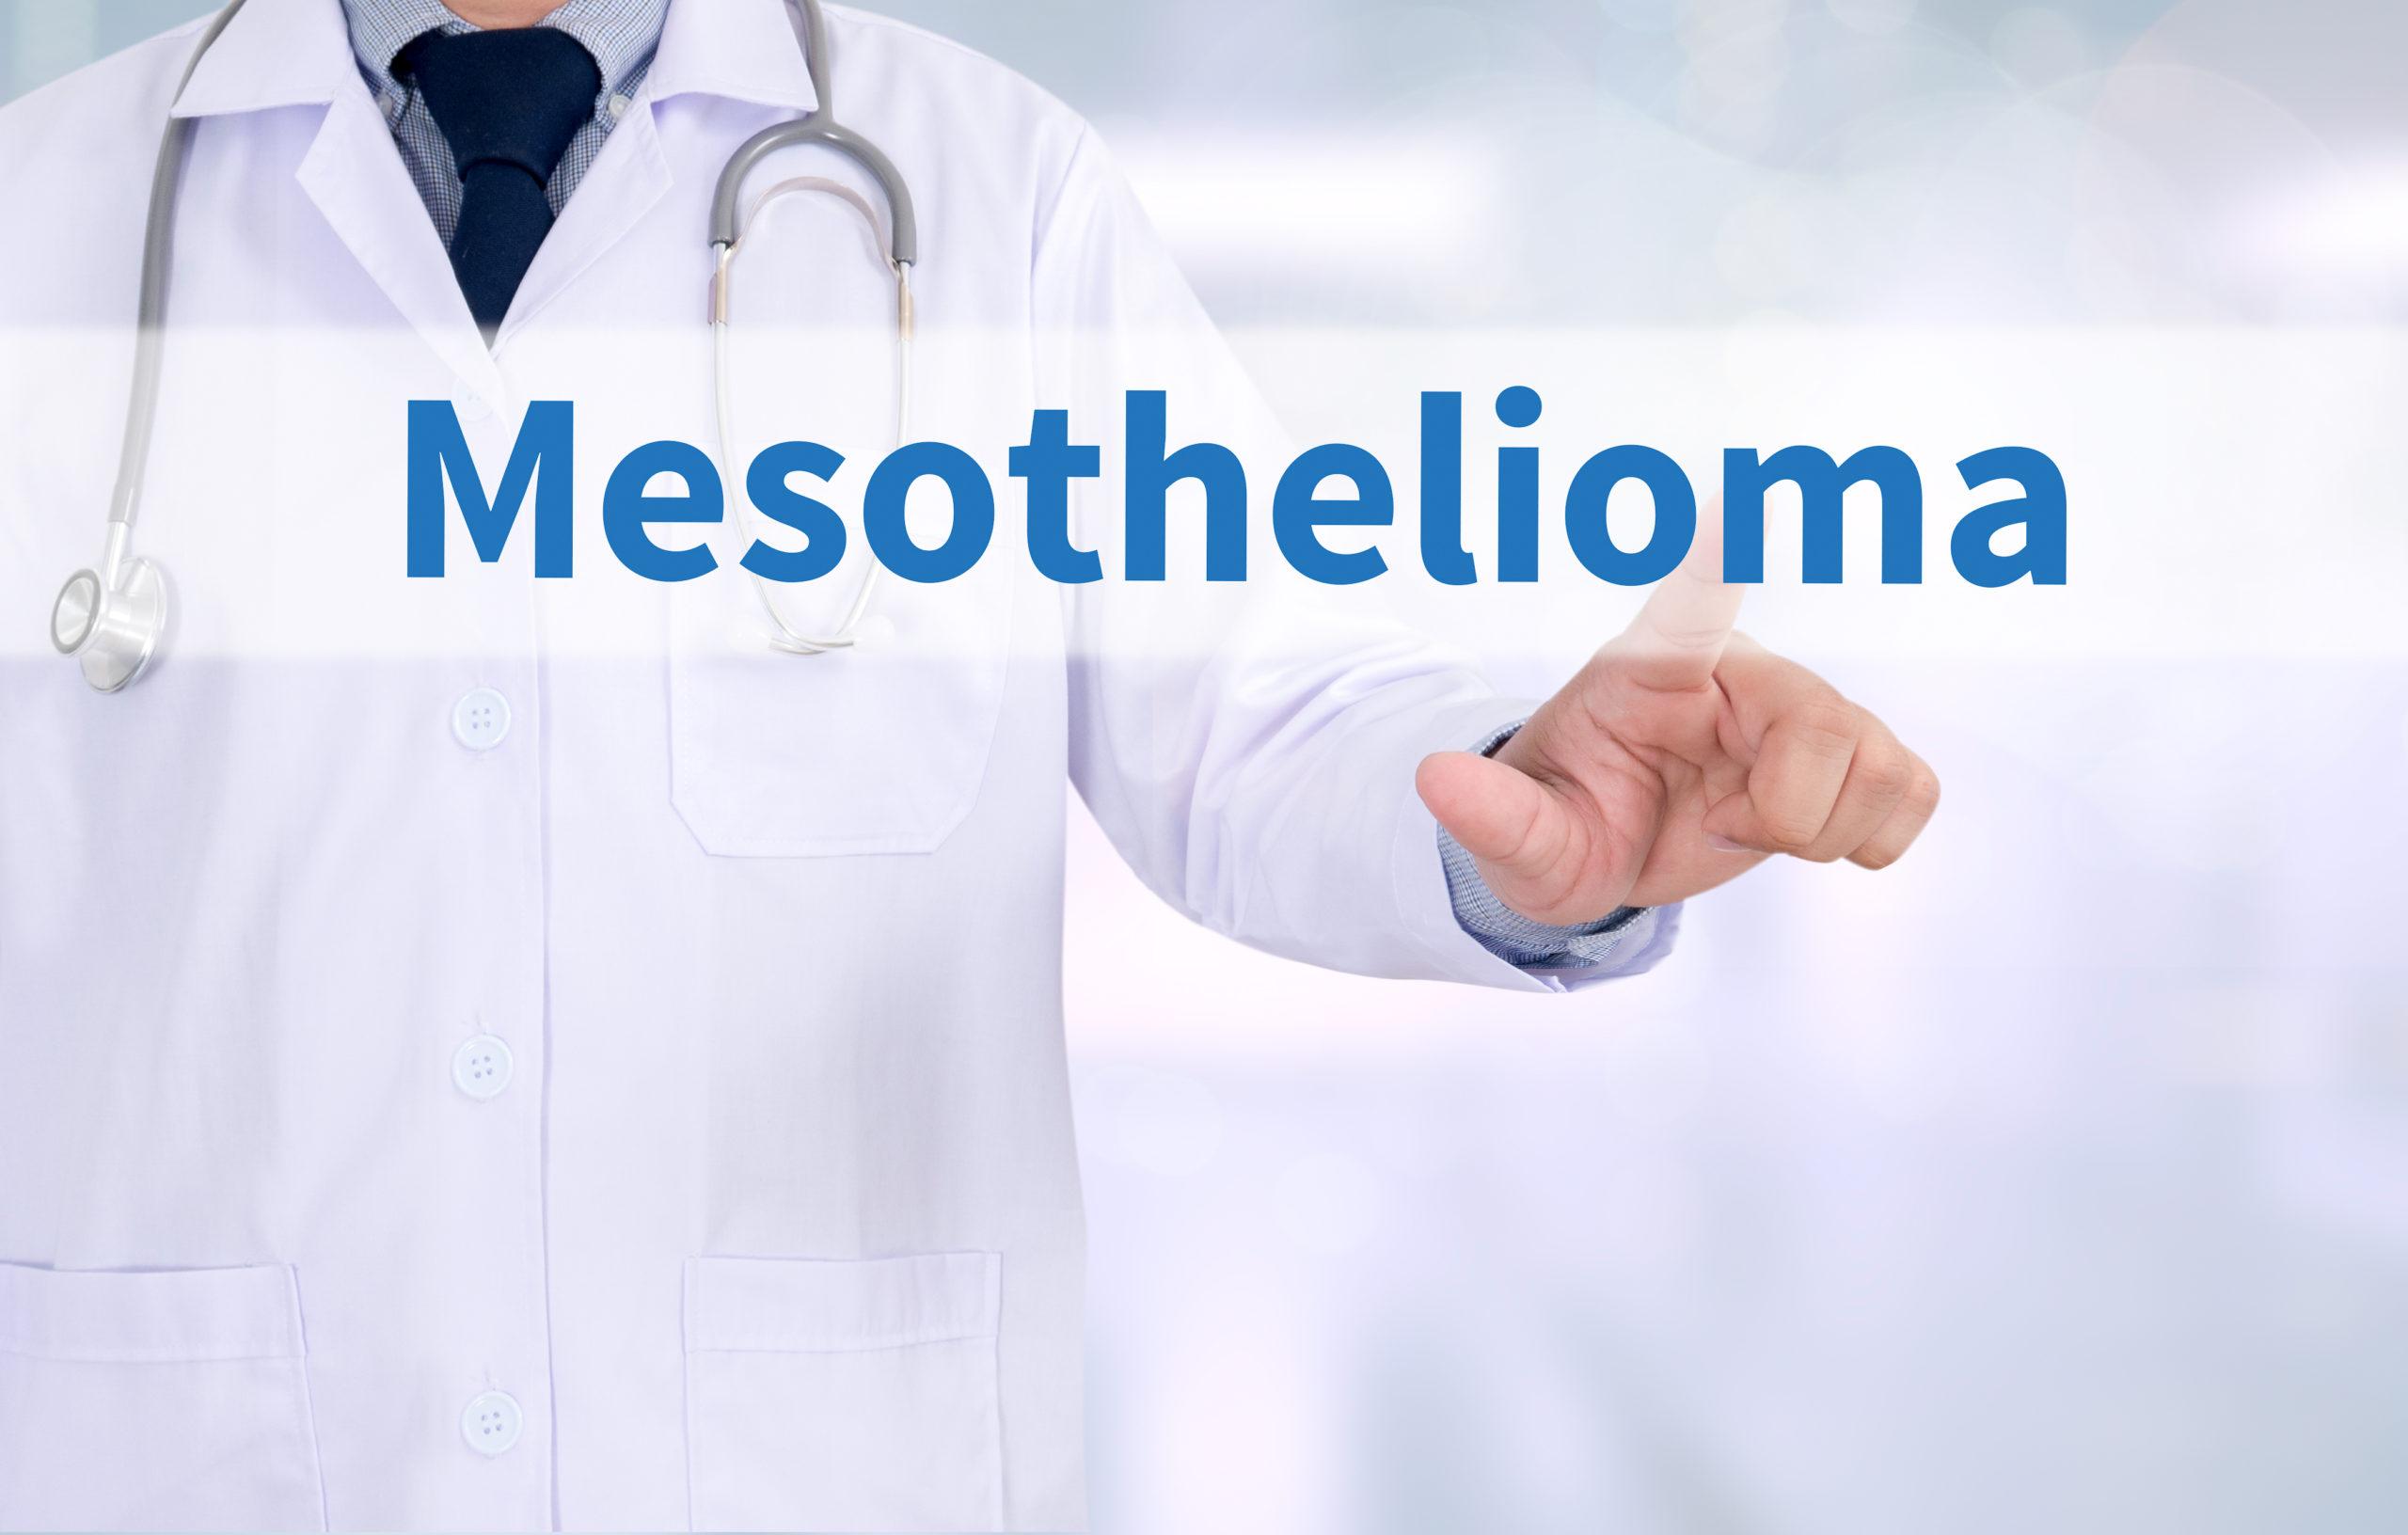 What is the main cause of mesothelioma